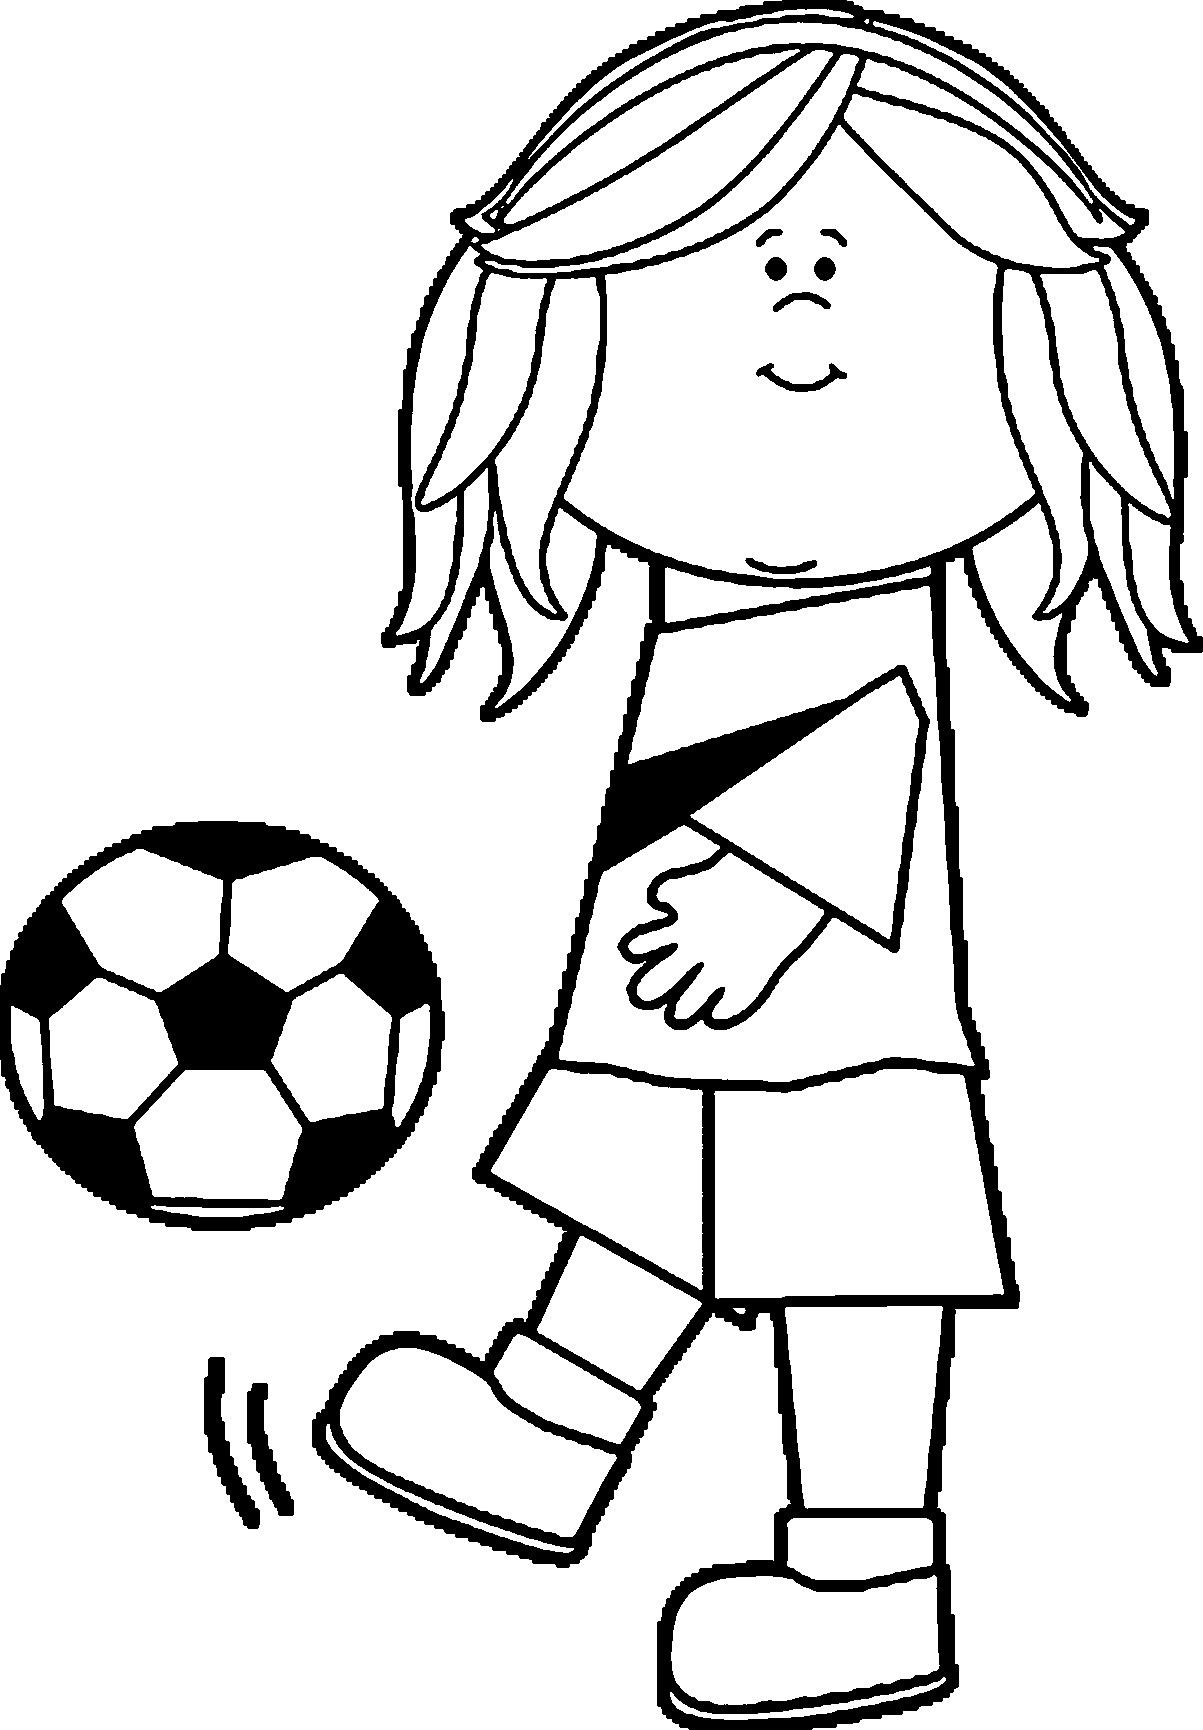 Girls Soccer Coloring Pages
 Soccer Girl Playing Football Coloring Page